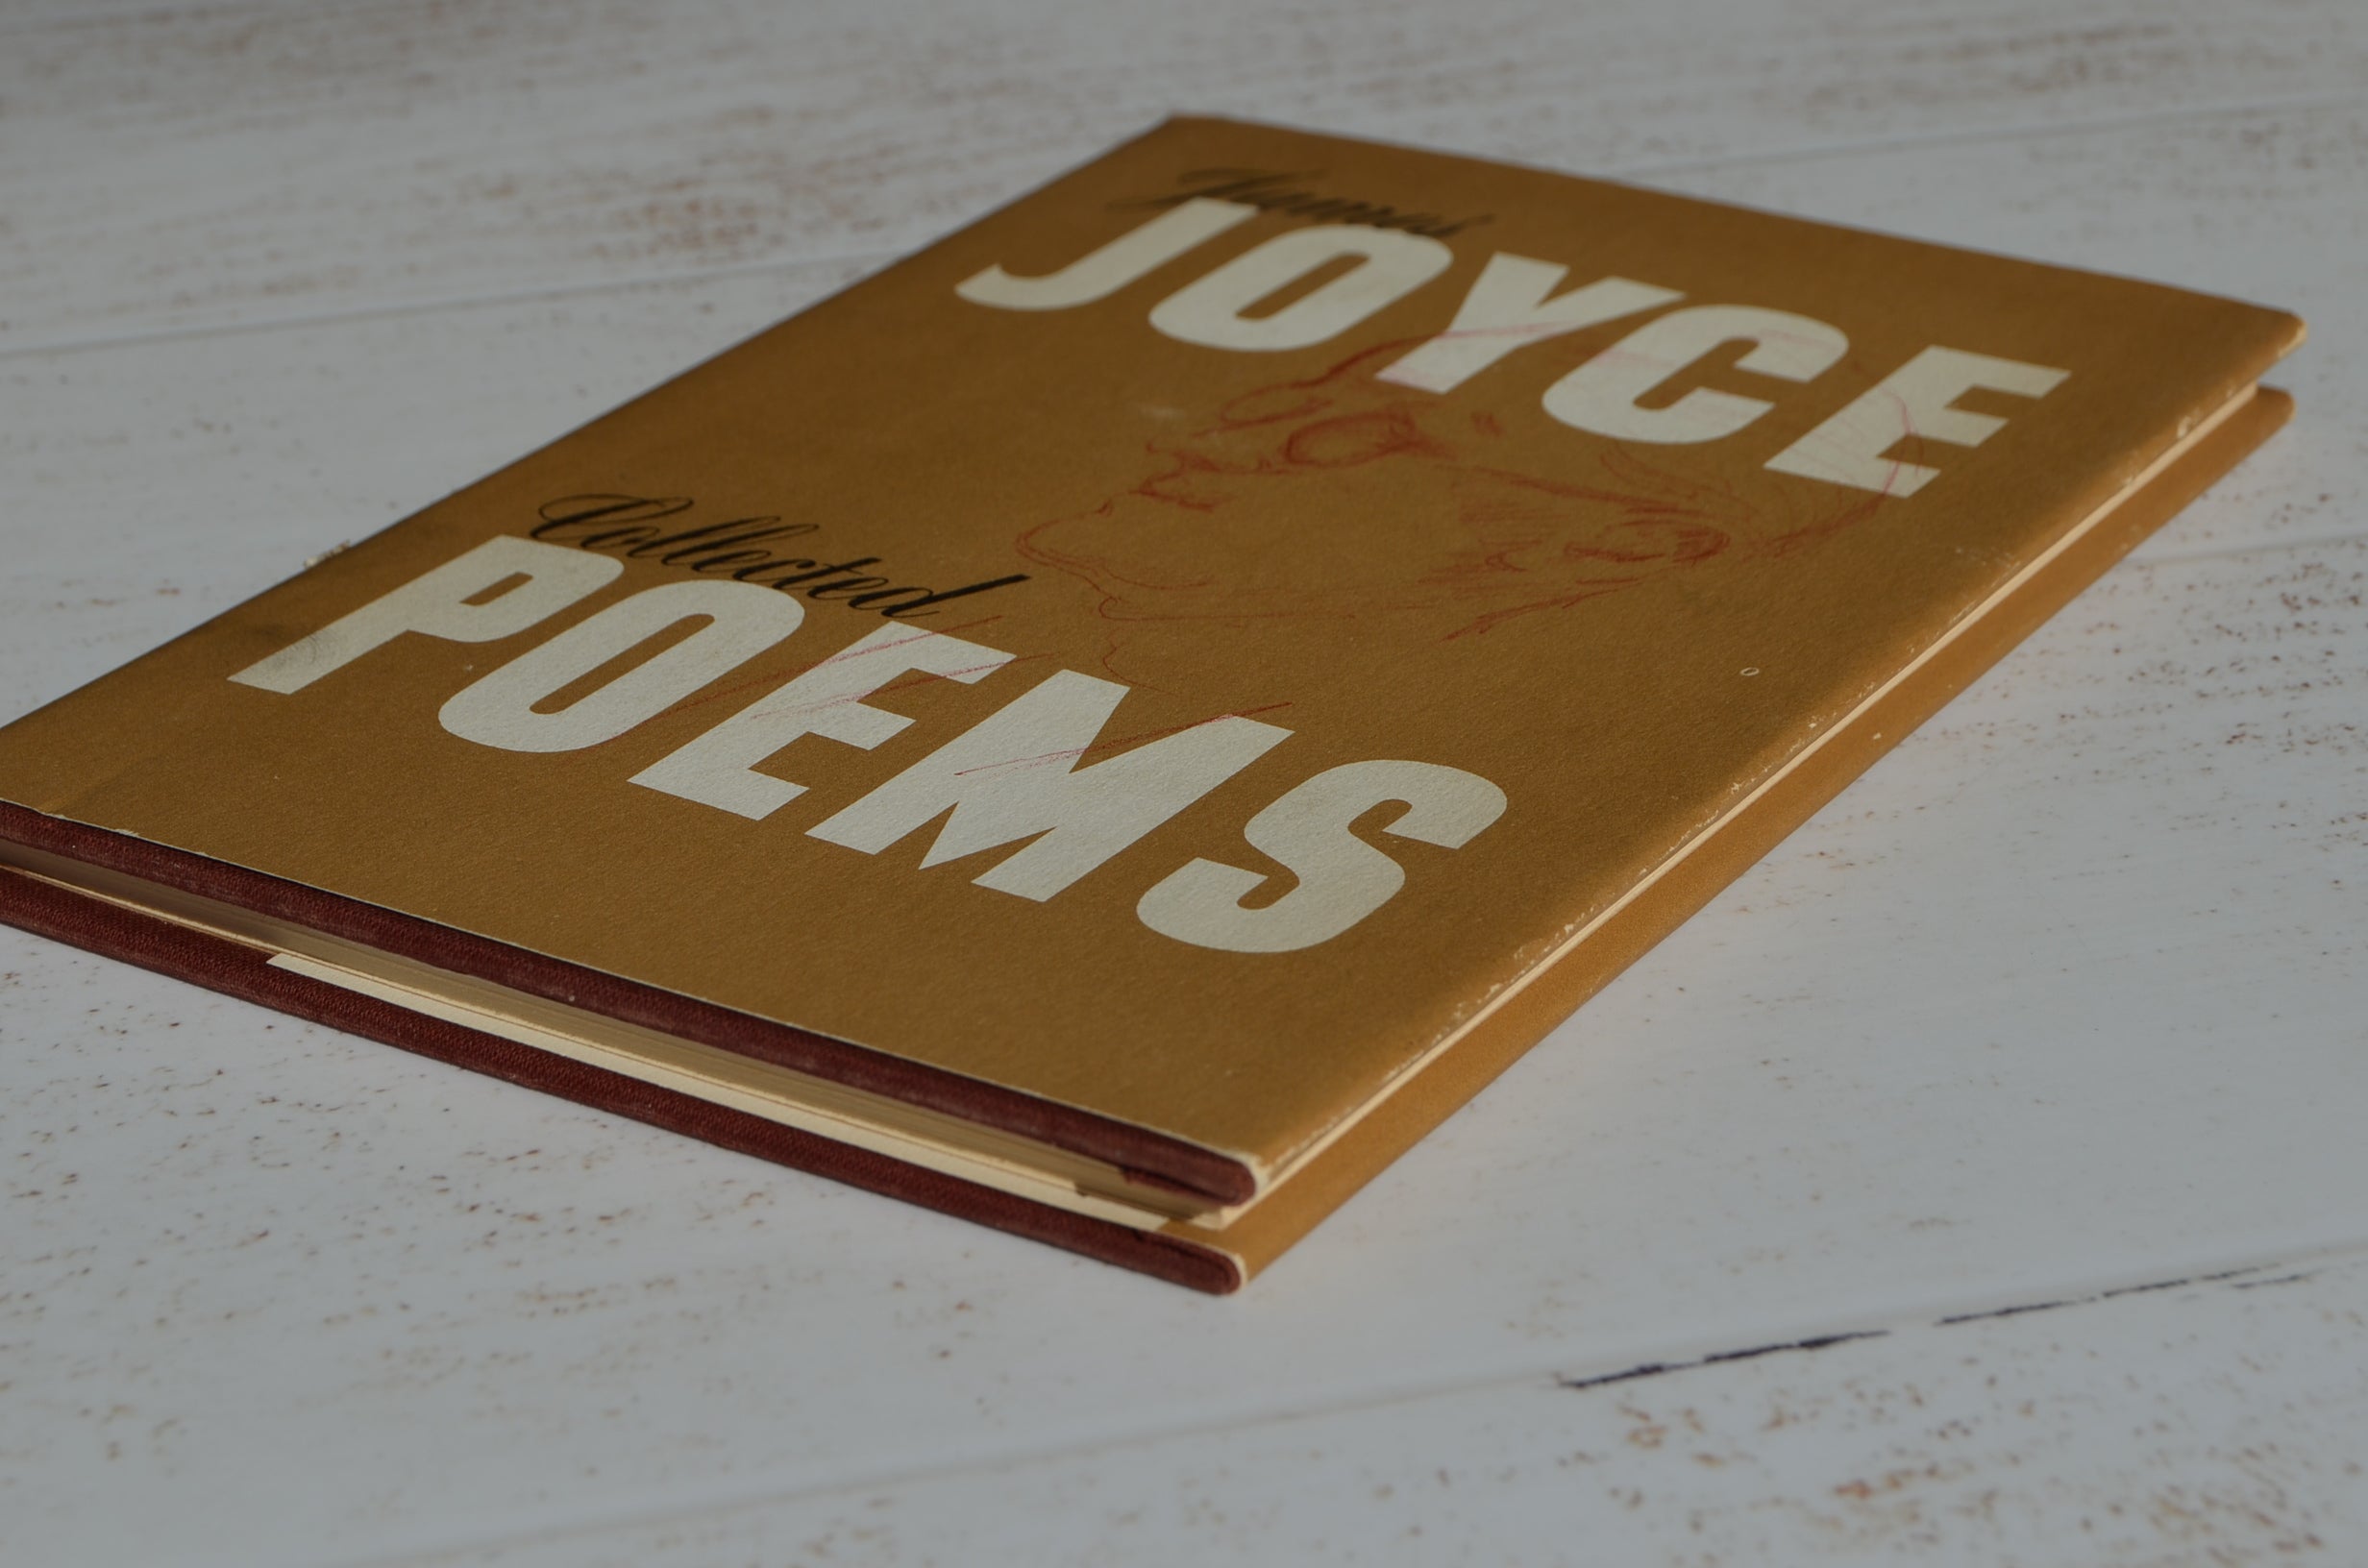 Sixth Printing – Collected Poems by James Joyce 1965